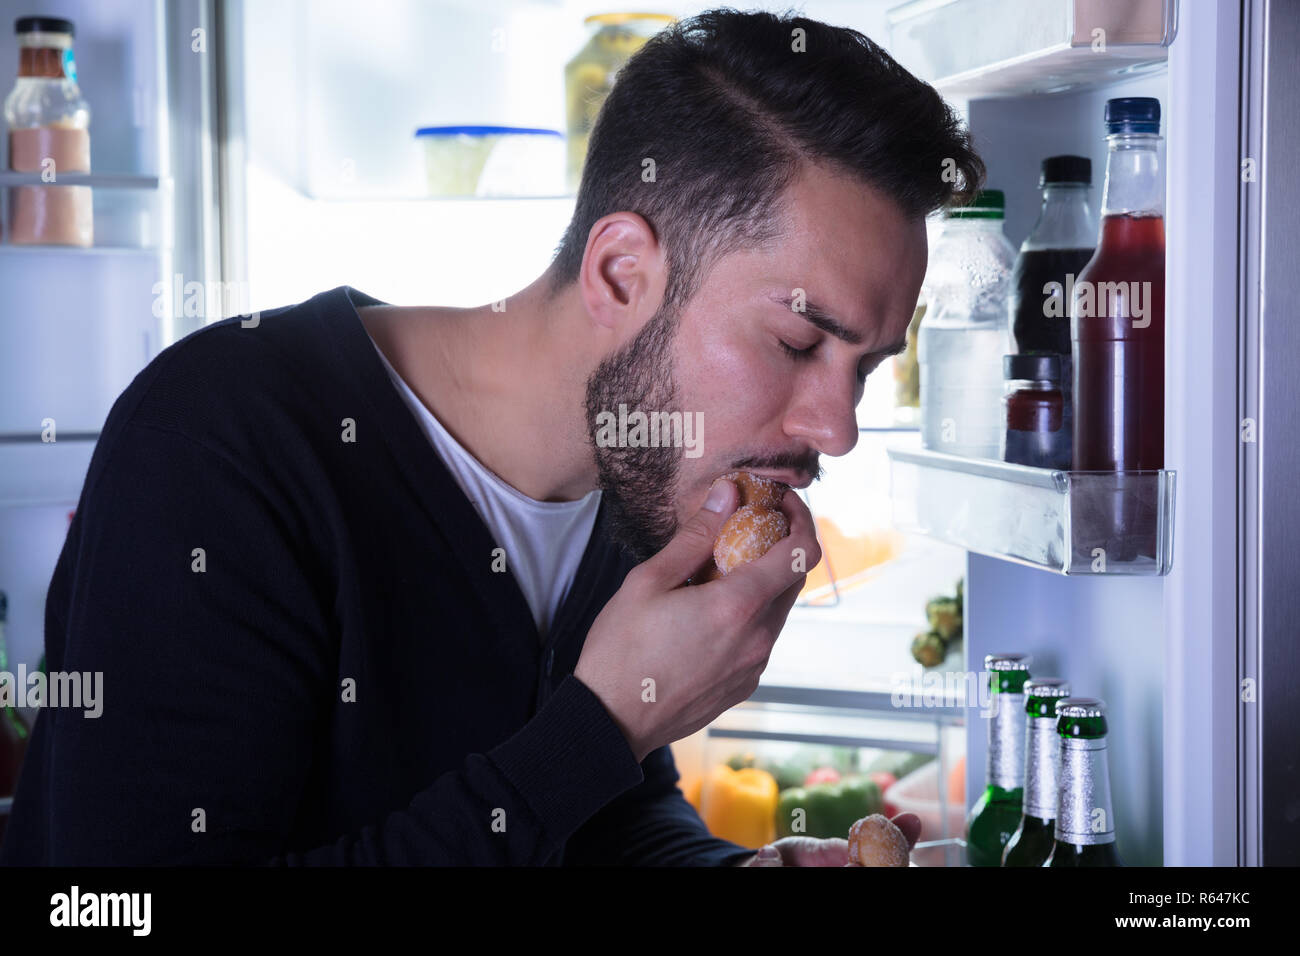 Close-up Of A Man Eating Cookie Stock Photo